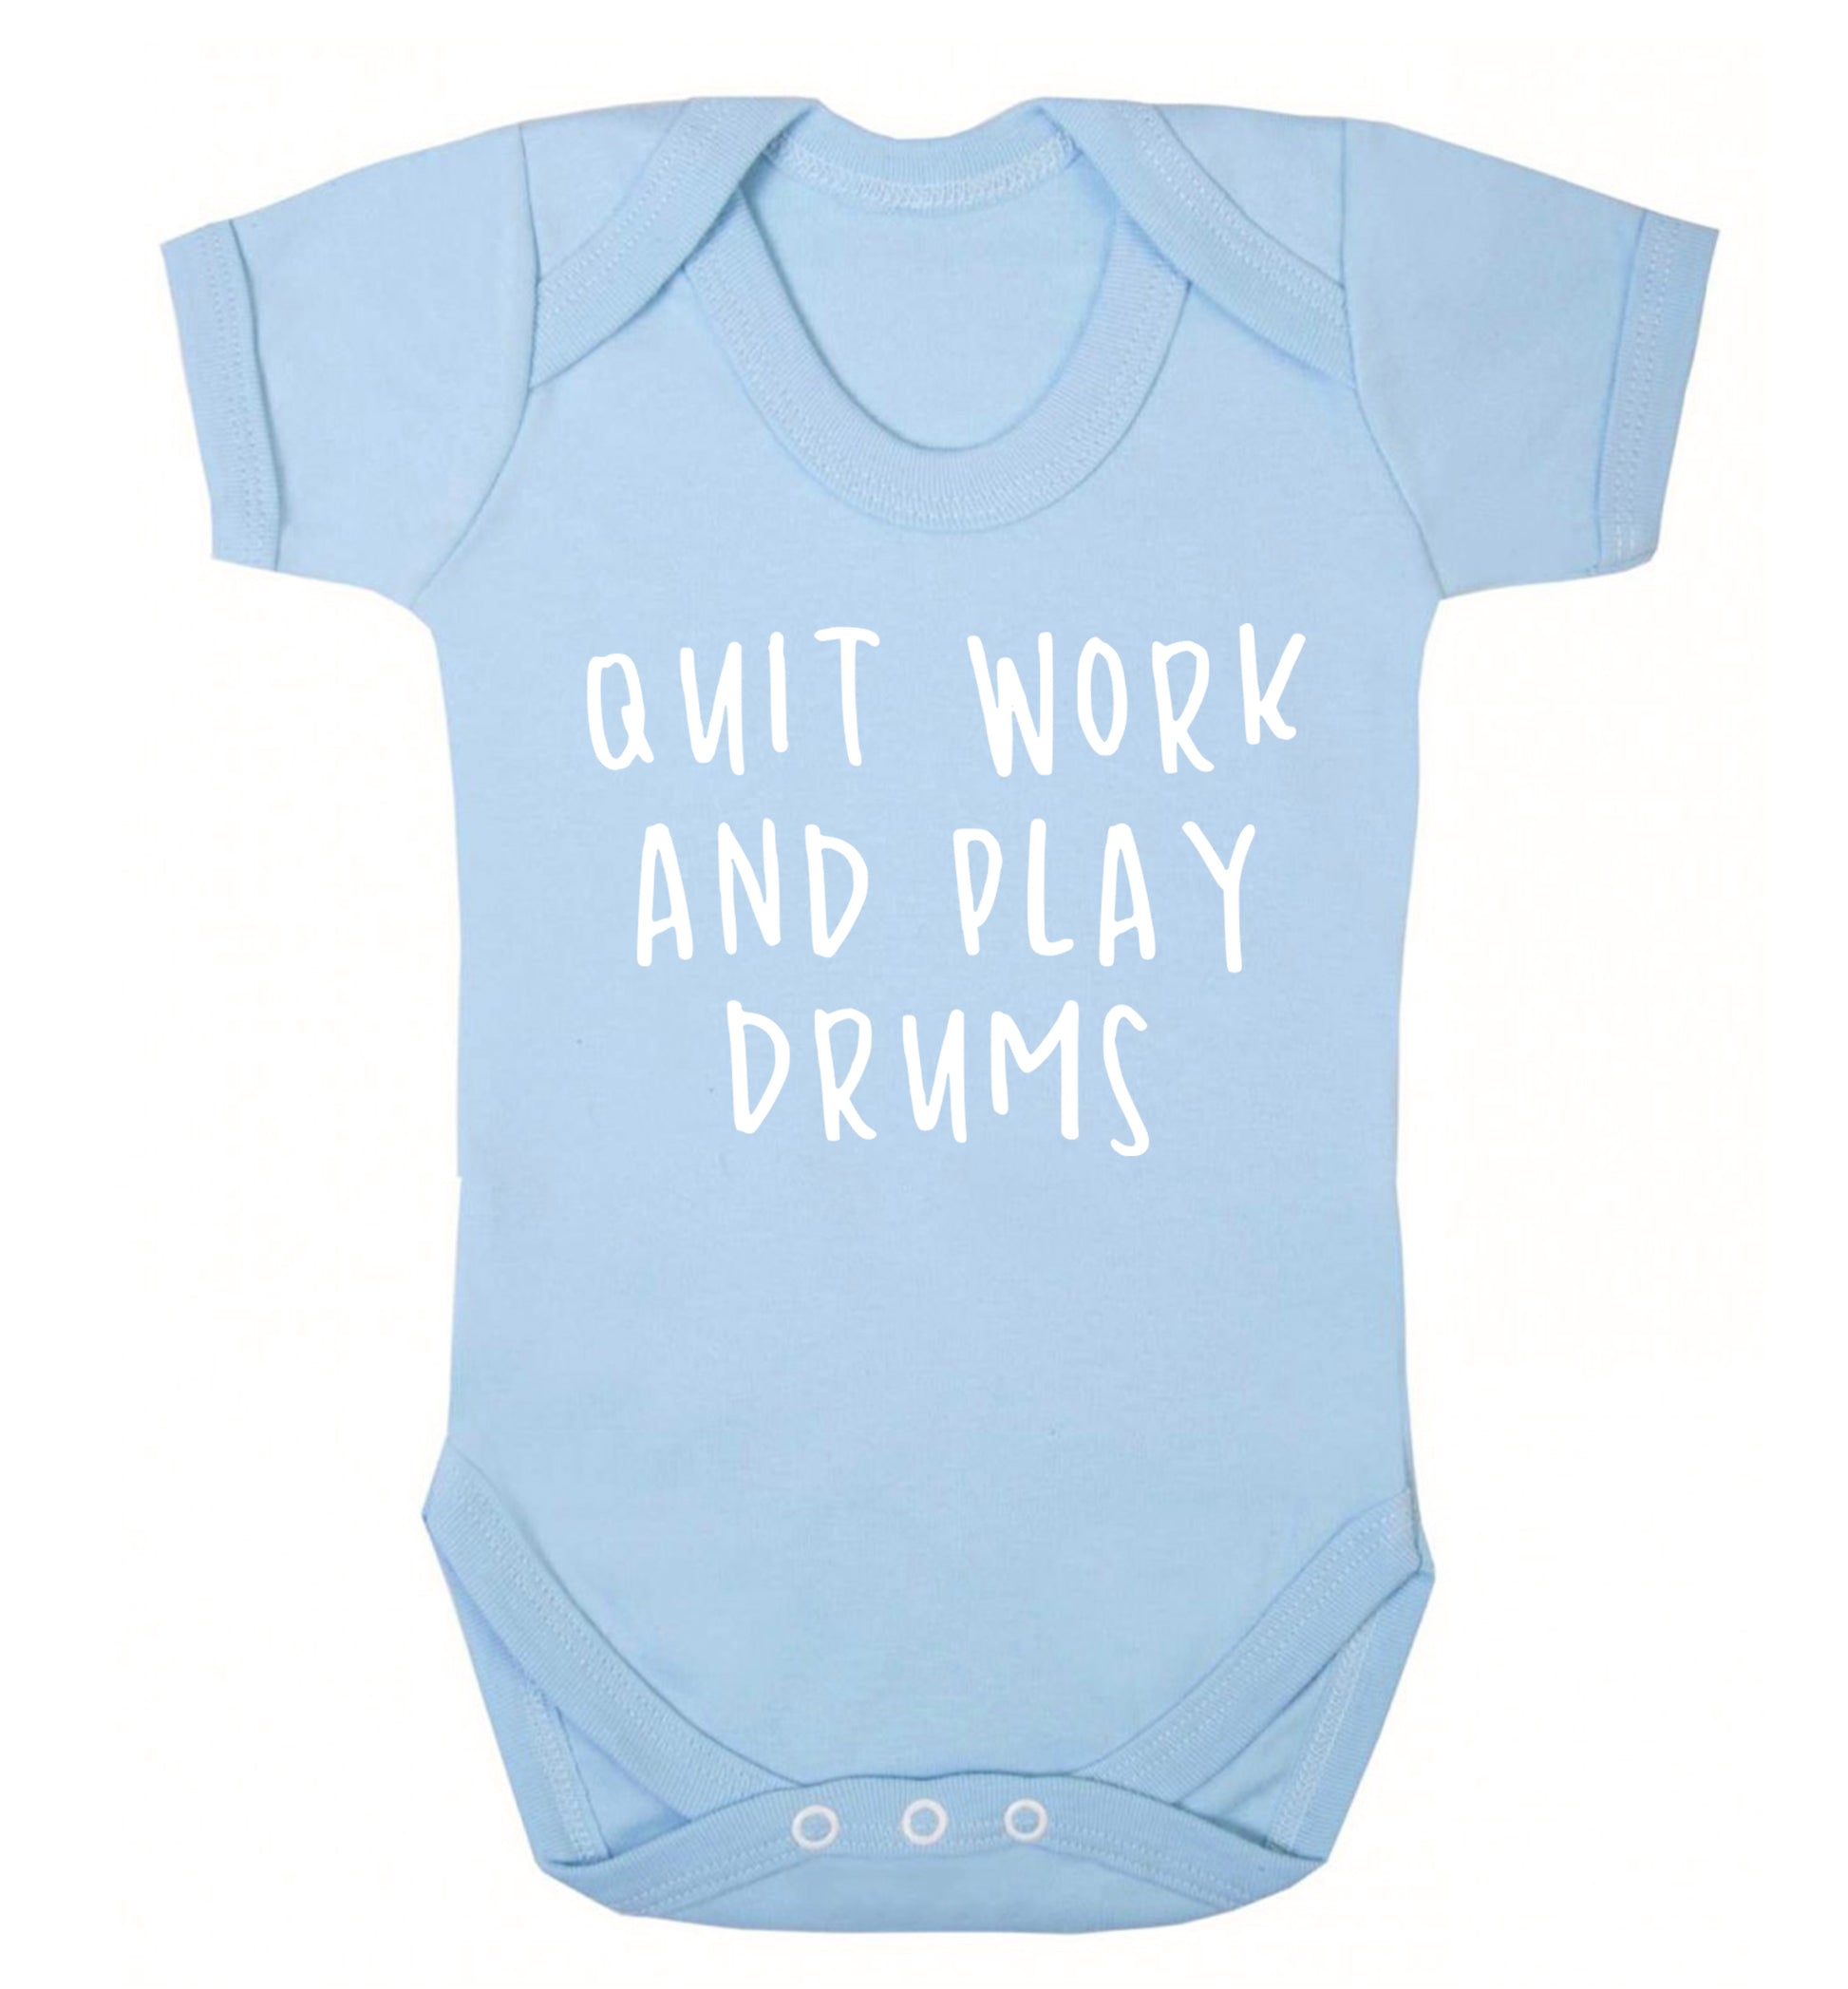 Quit work and play drums Baby Vest pale blue 18-24 months